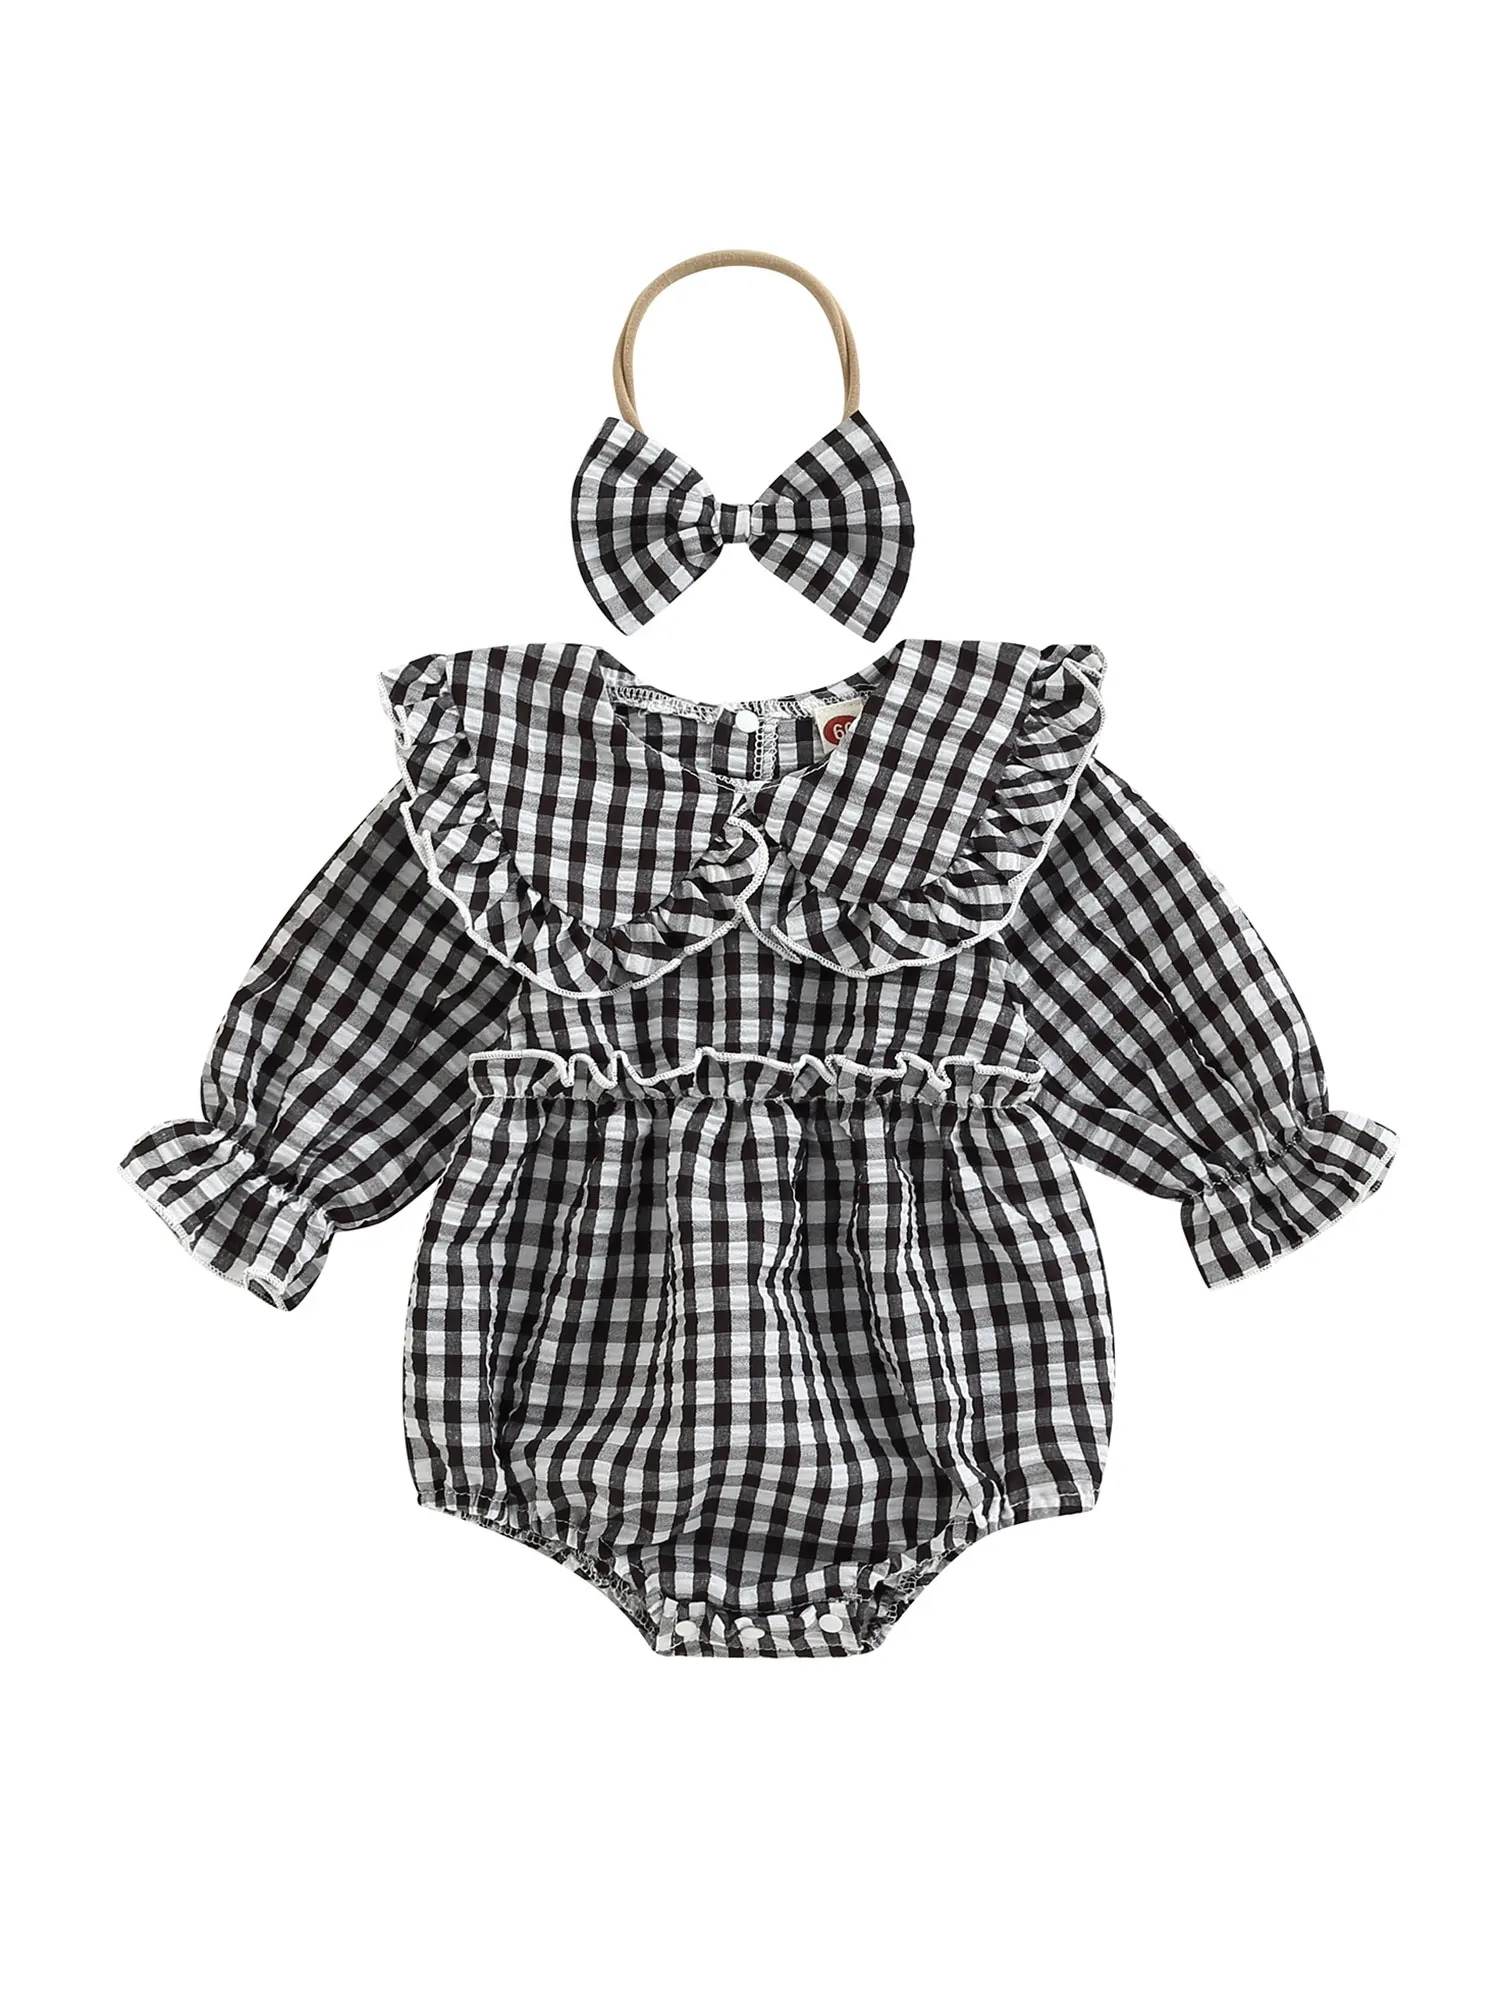 

Autumn Infant Baby Girl Fall Outfit Plaid Collar Long Sleeve Ruffle Bodysuit Hairband Clothes Set 0-18Months